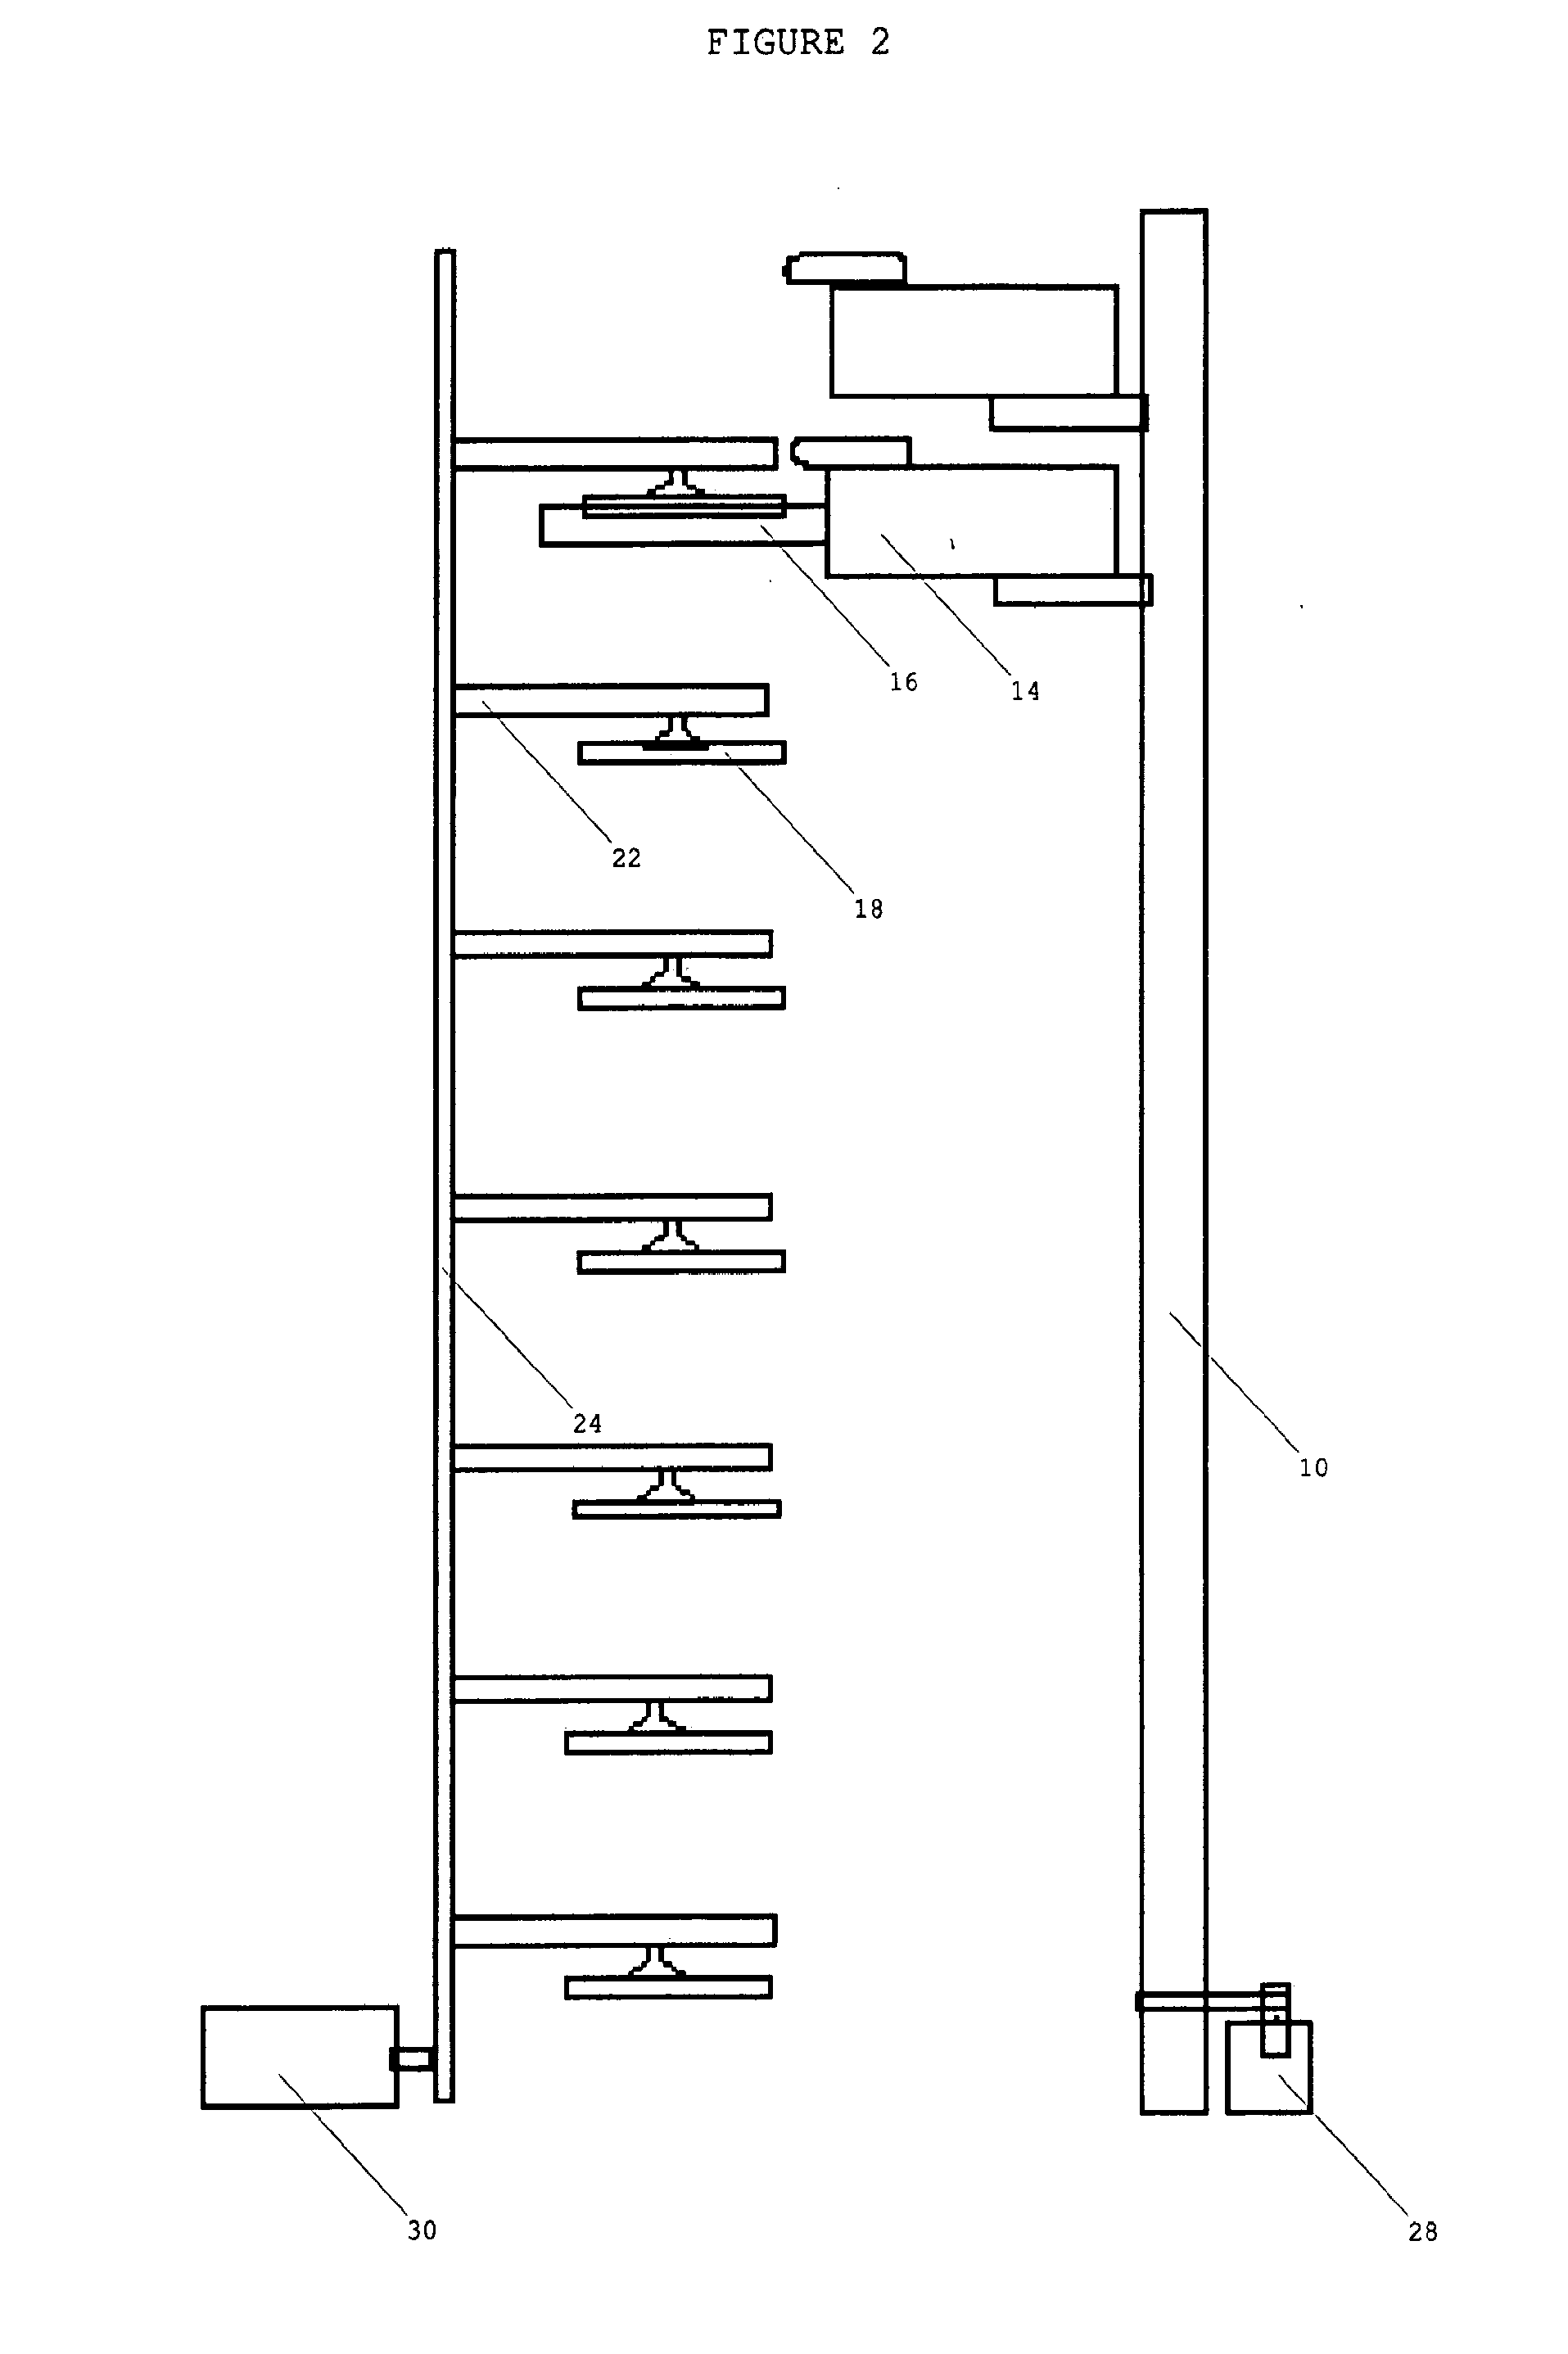 Automated optical disk loading rack